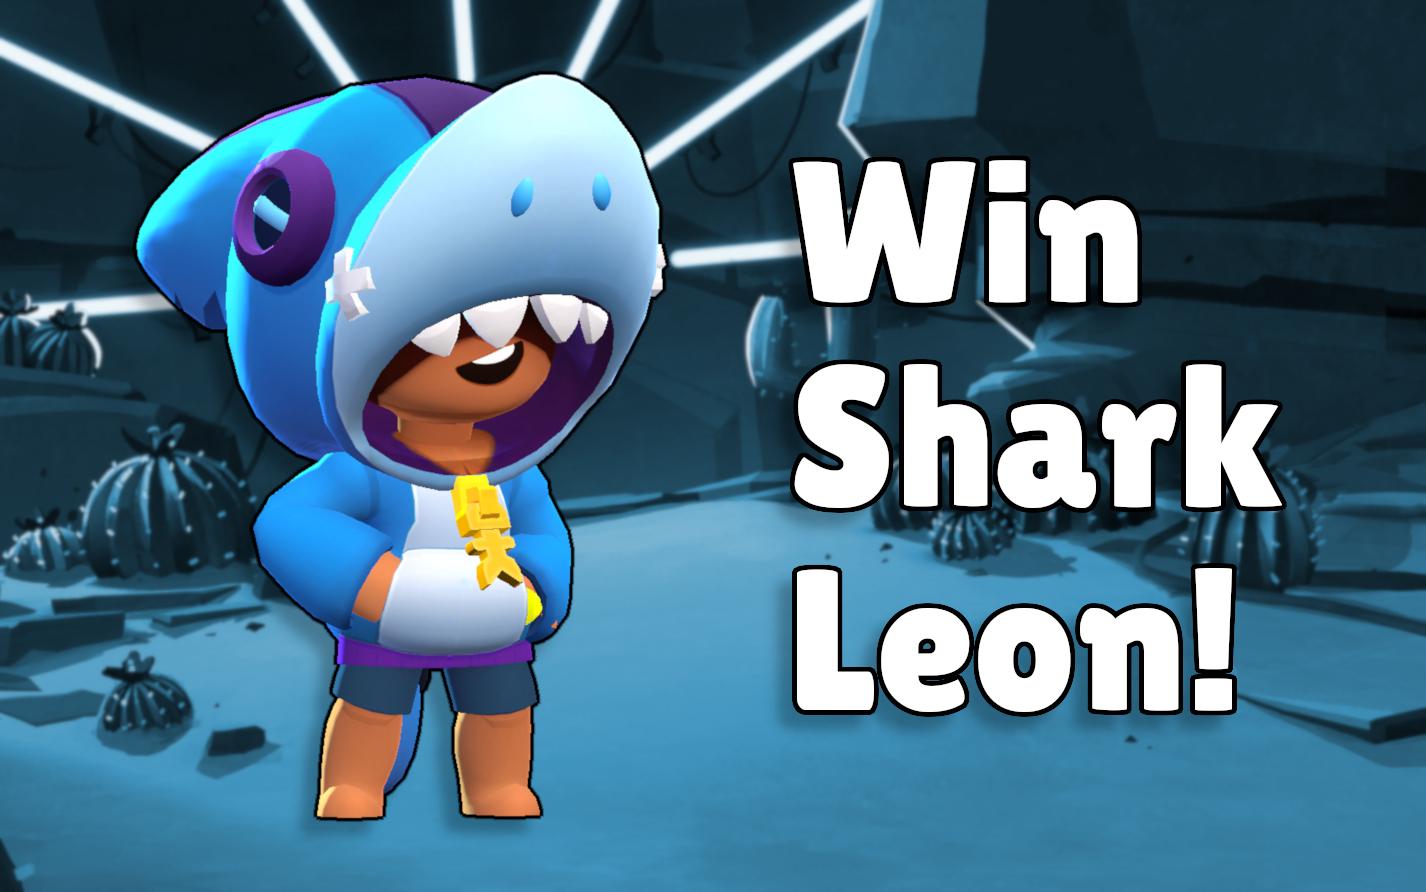 Pixel Crux On Twitter It S Time Again To Winbrawlskins Brawlstars Has Given Us 2 Shark Leon Skins To Give Away Early And If You Win And Don T Have Leon You Ll Unlock Him - pixel leon brawl stars